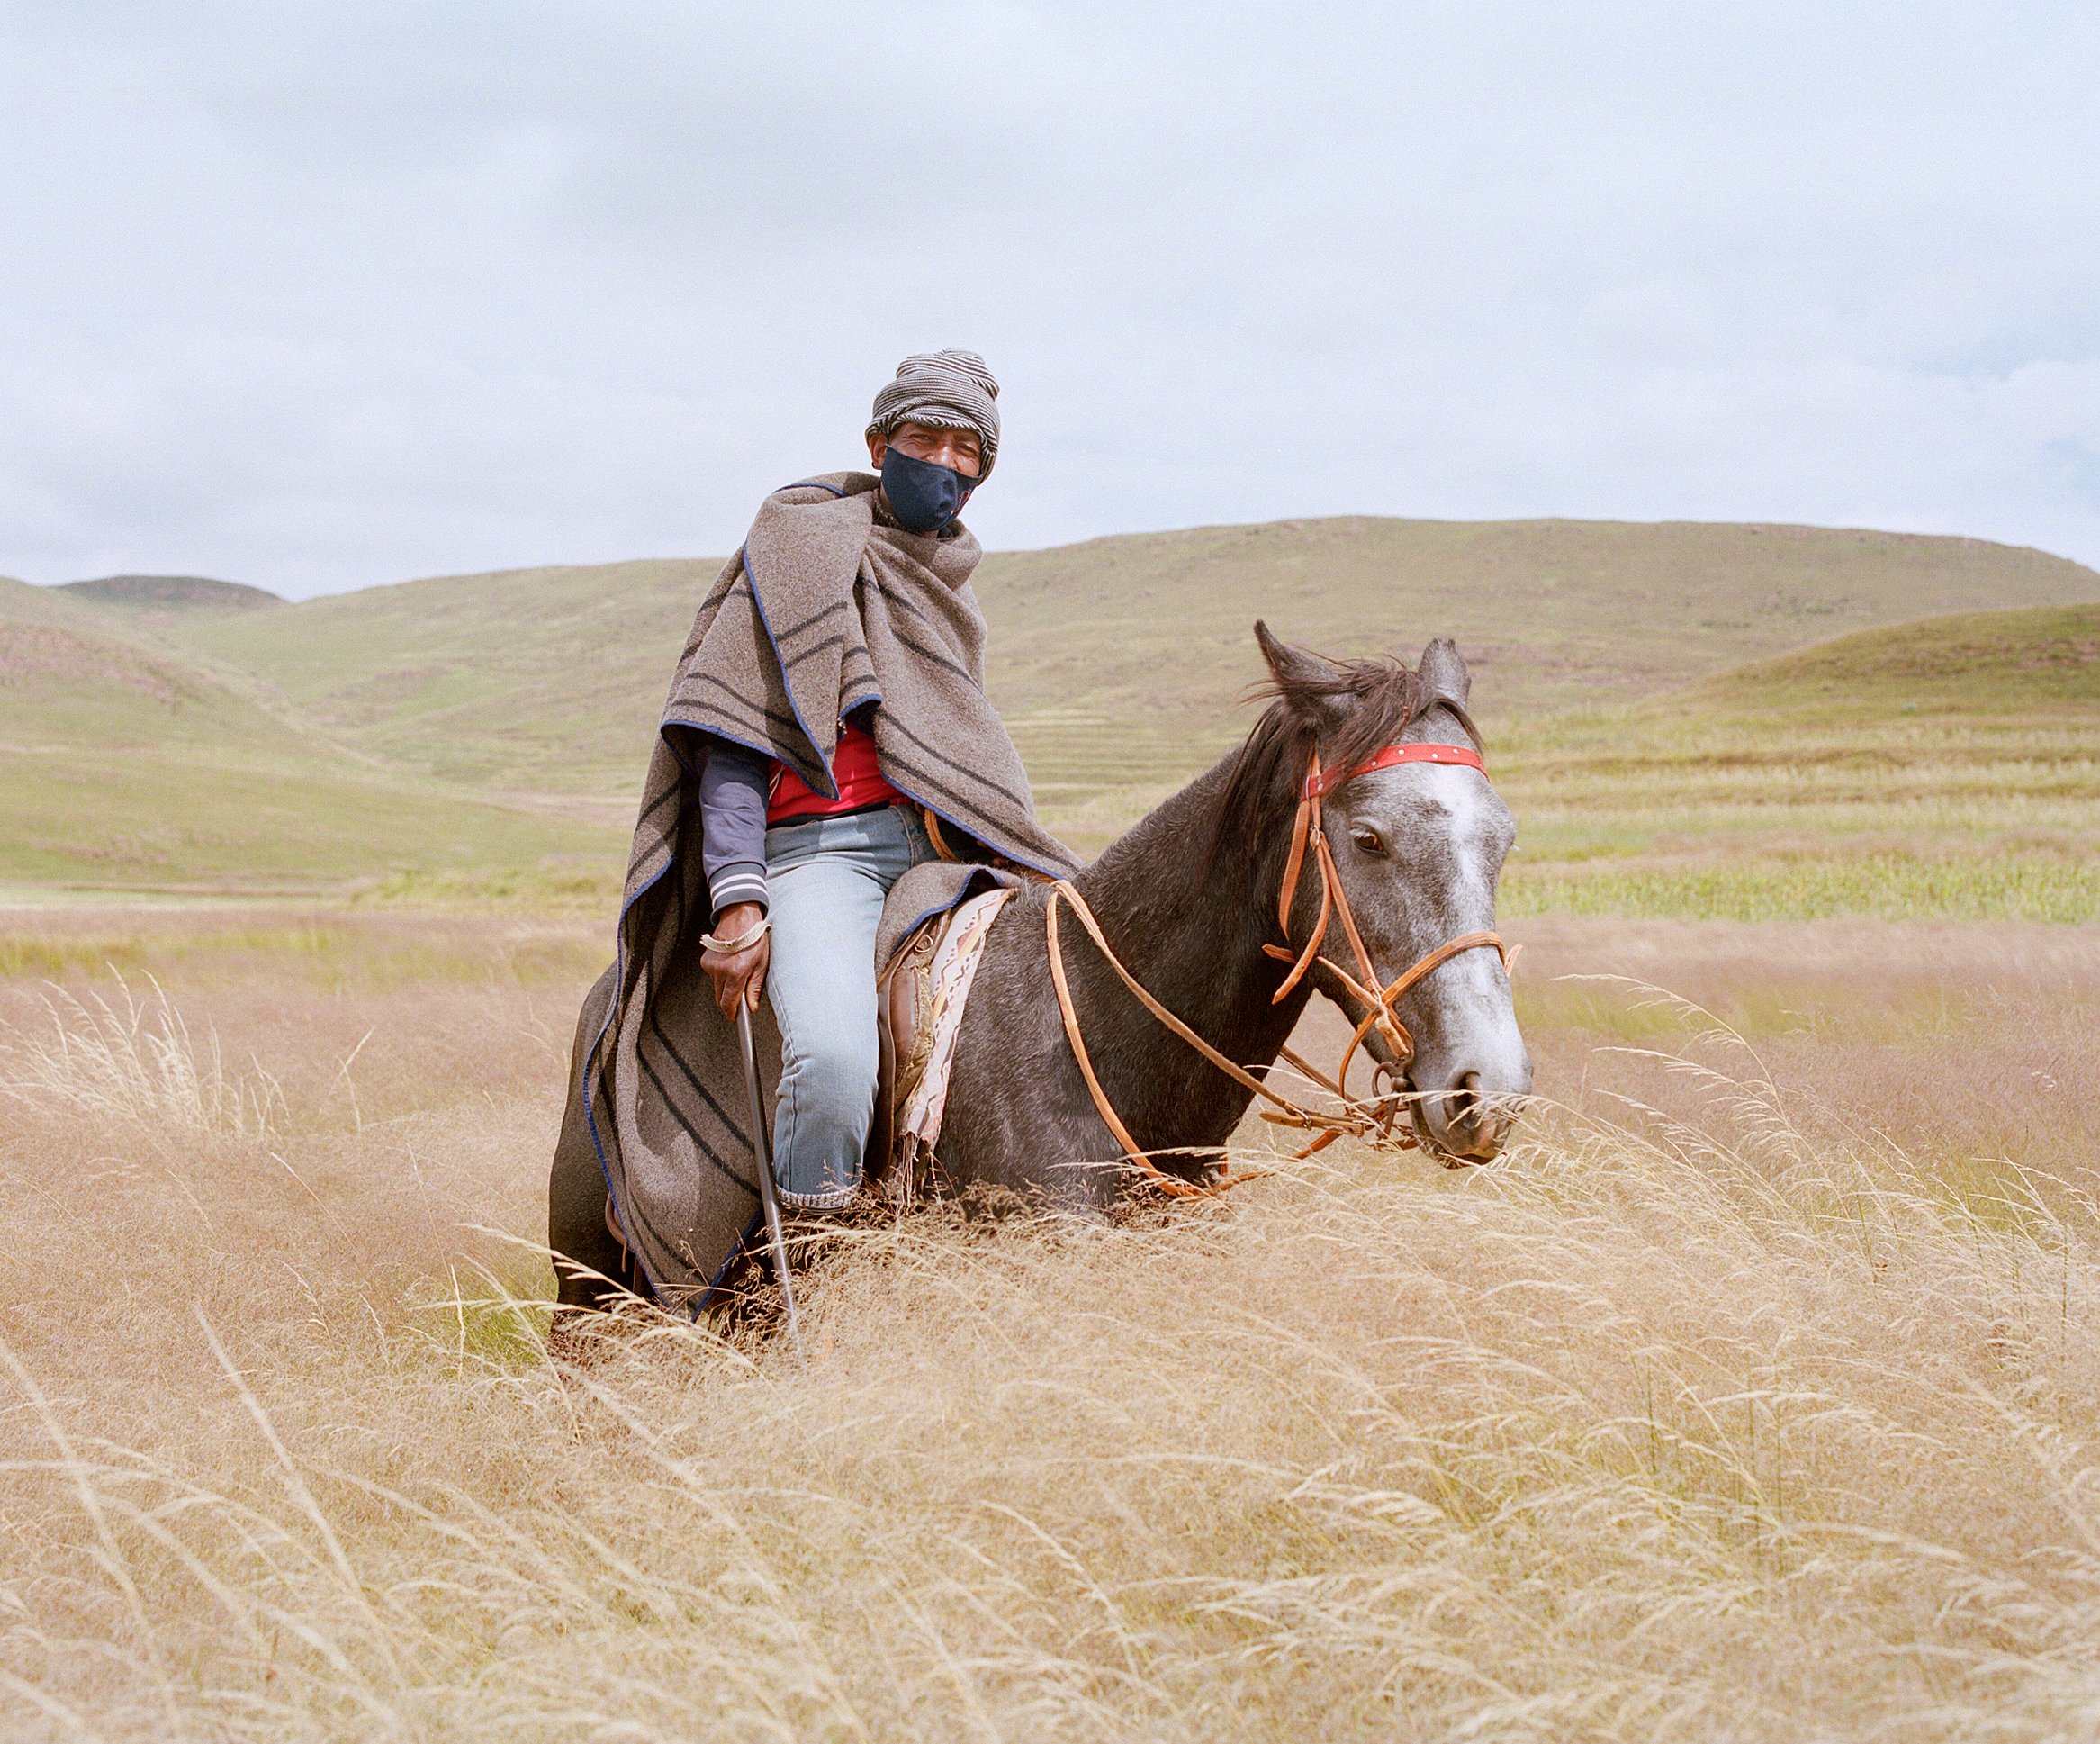  Horseman  Goodleaf x Altitude   Producing cannabis for medical and beauty products in the mountains of Lesotho 